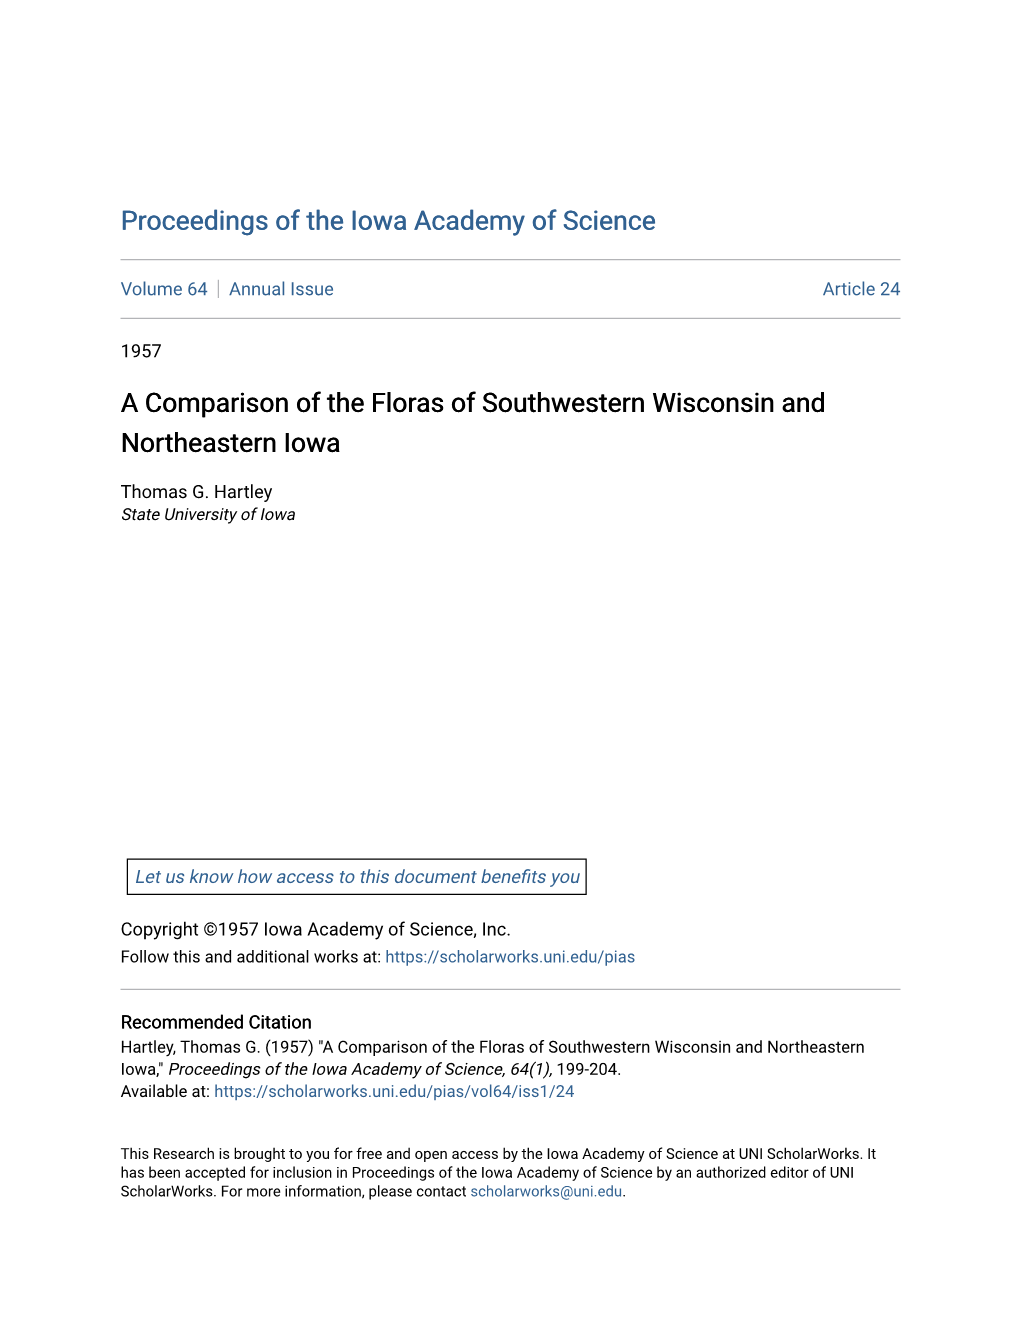 A Comparison of the Floras of Southwestern Wisconsin and Northeastern Iowa